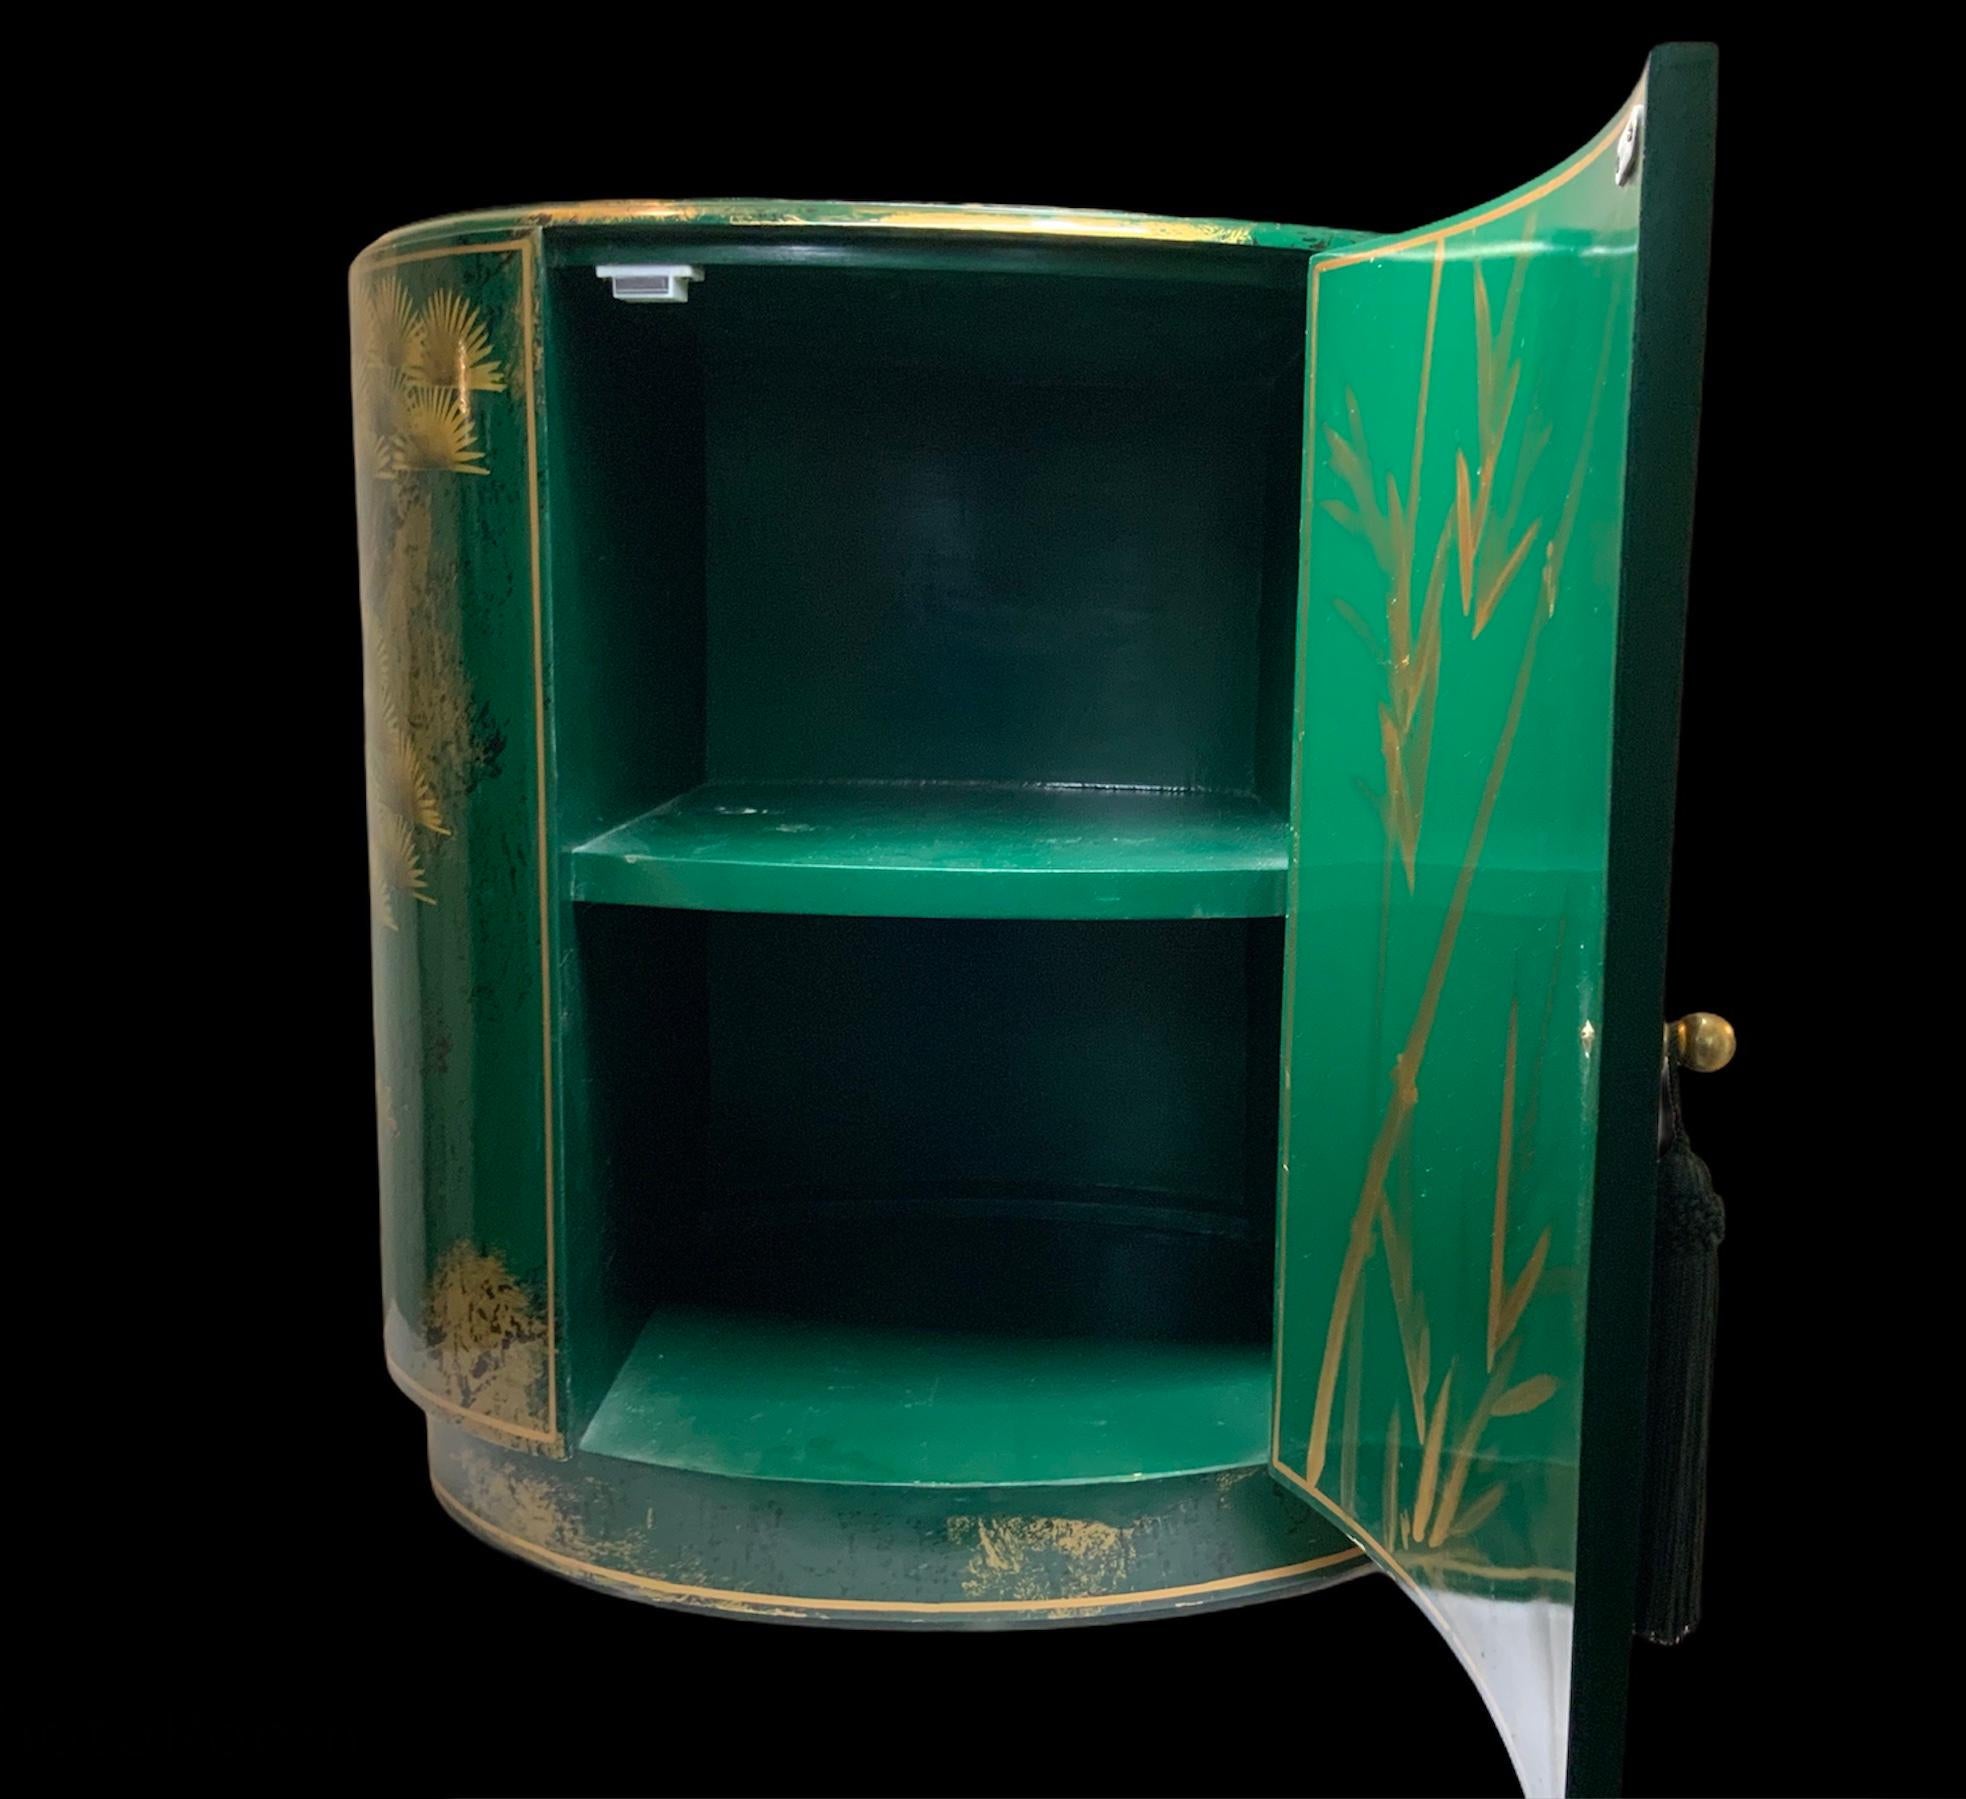 This is an oriental style large oval shaped shiny emerald green wood cabinet table. It is adorned with a continuous hand painted scene of a pair of large white-black cranes and gilt cedar bonsai trees. In the back of the door, it is adorned with